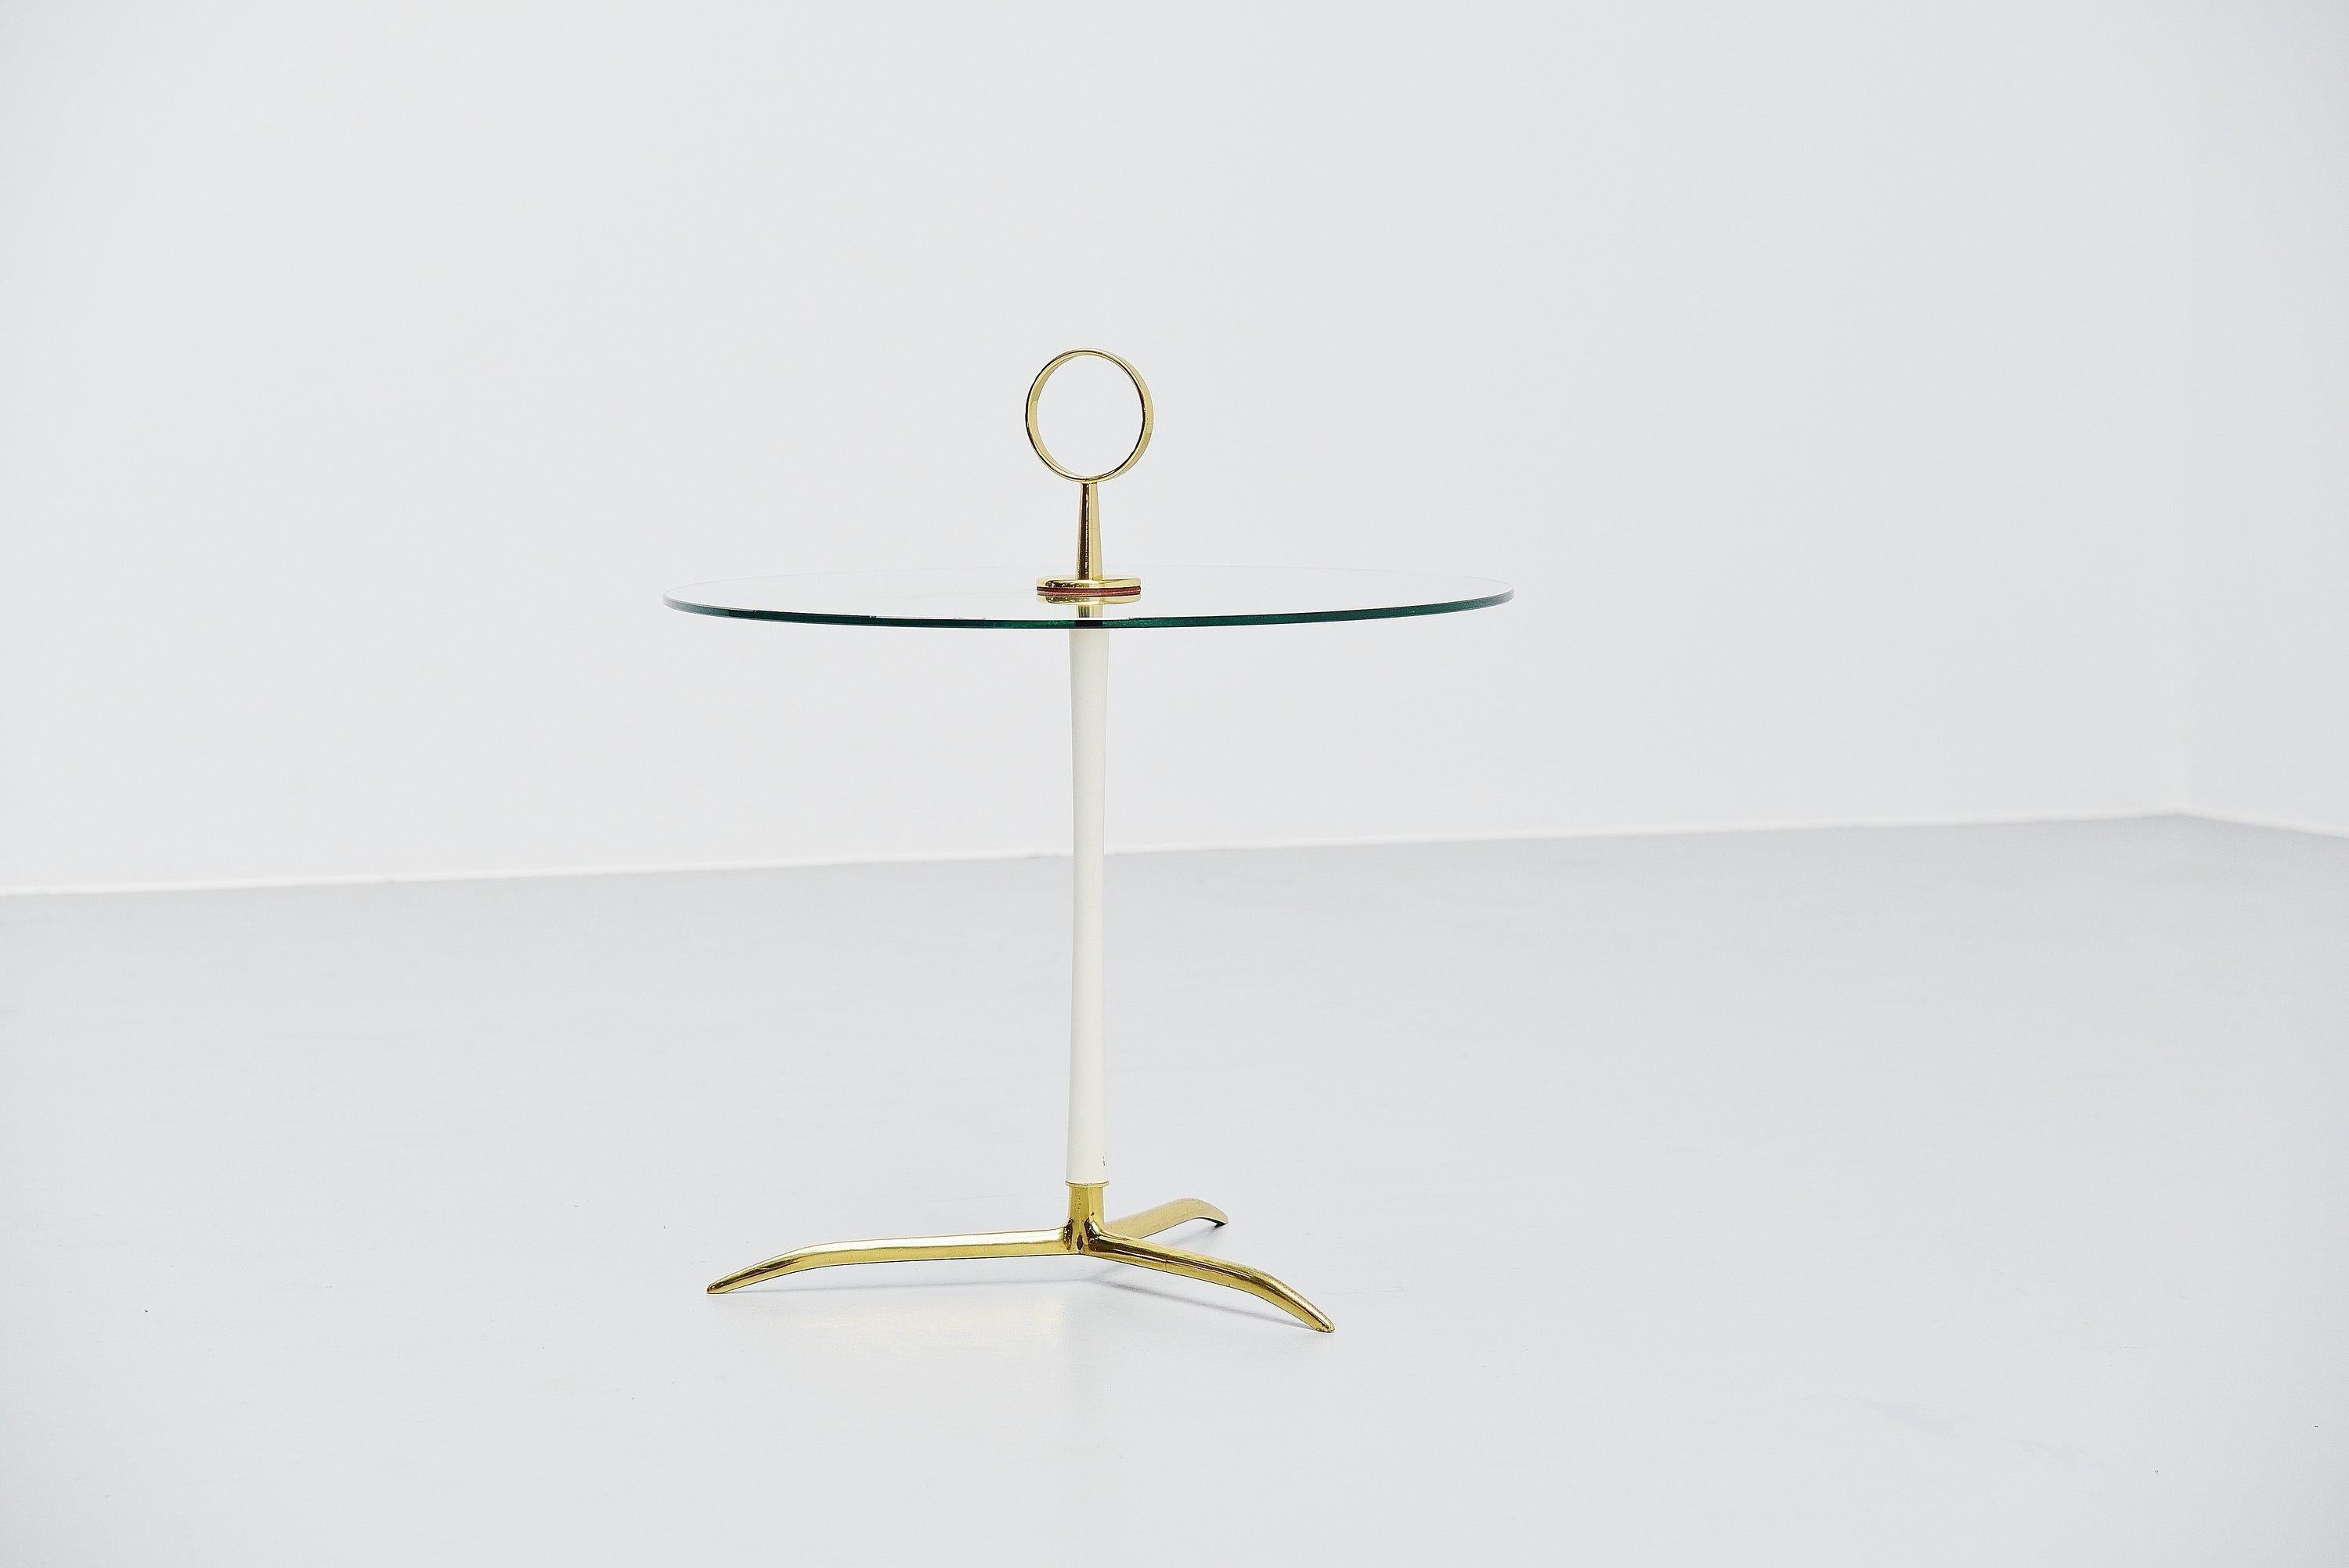 Cold-Painted Cesare lacca side table in brass and glass Italy 1950